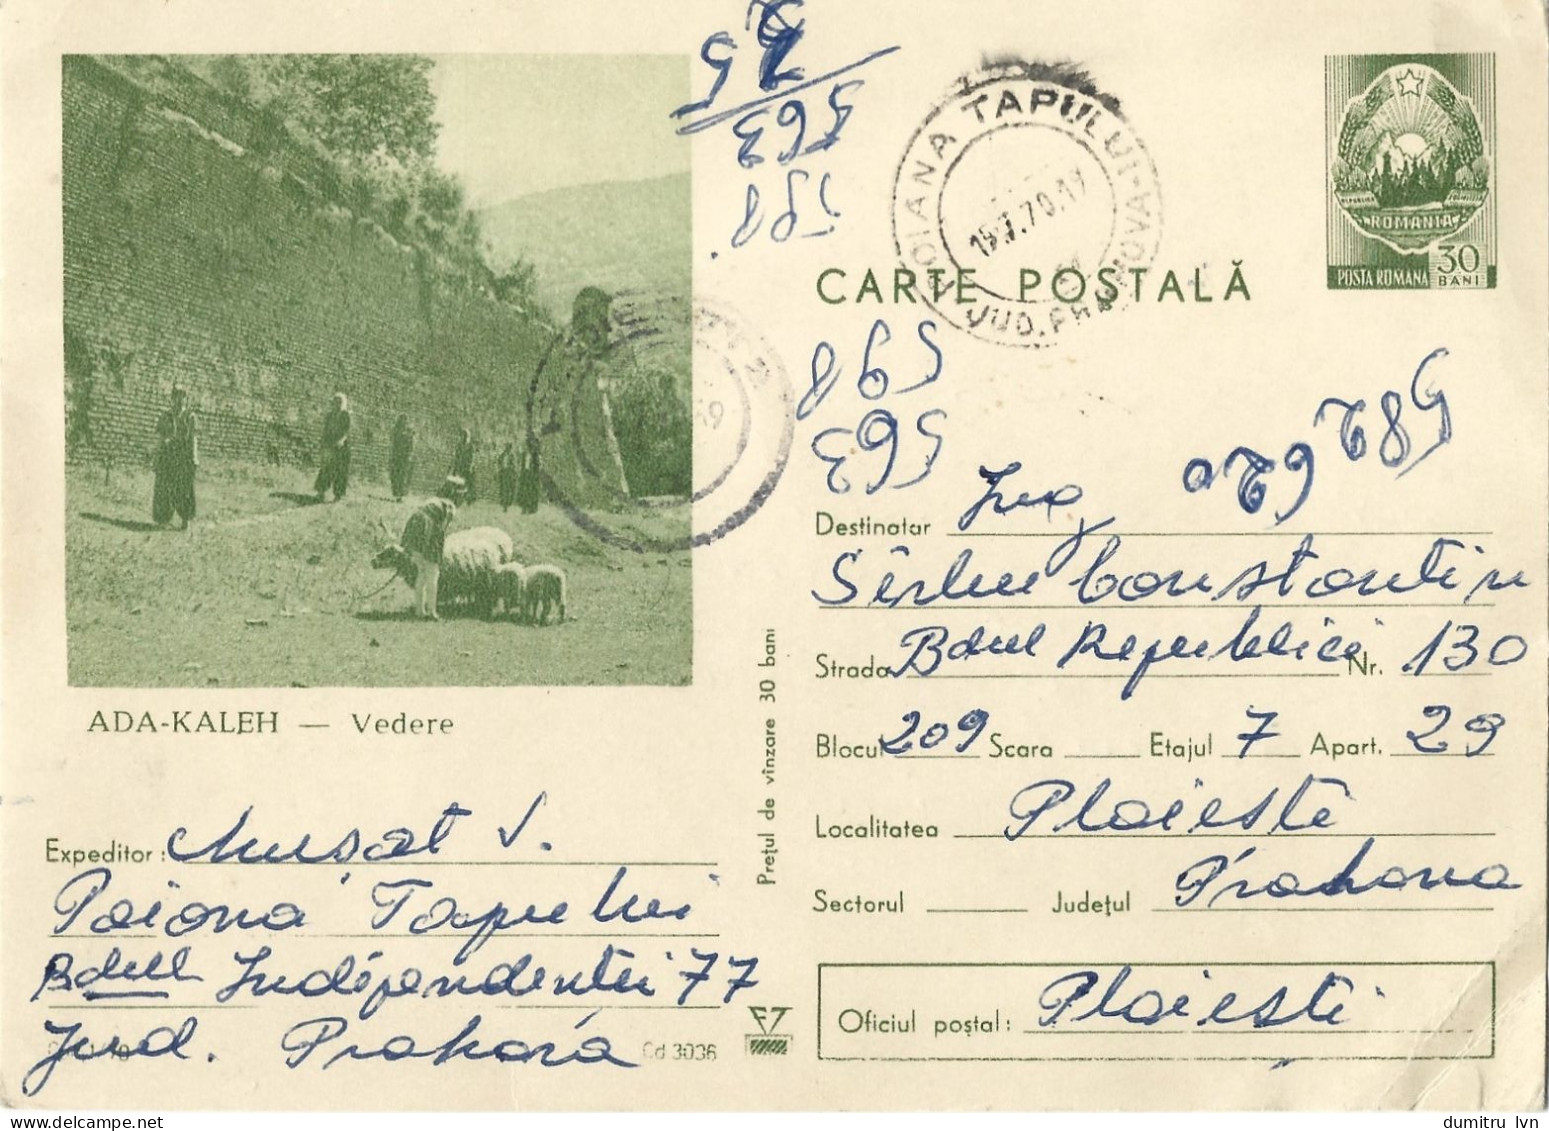 ROMANIA 1970 ADA-KALEH VIEW, THE CITY RUINS, PEOPLE, SHEEPS, POSTAL STATIONERY - Entiers Postaux